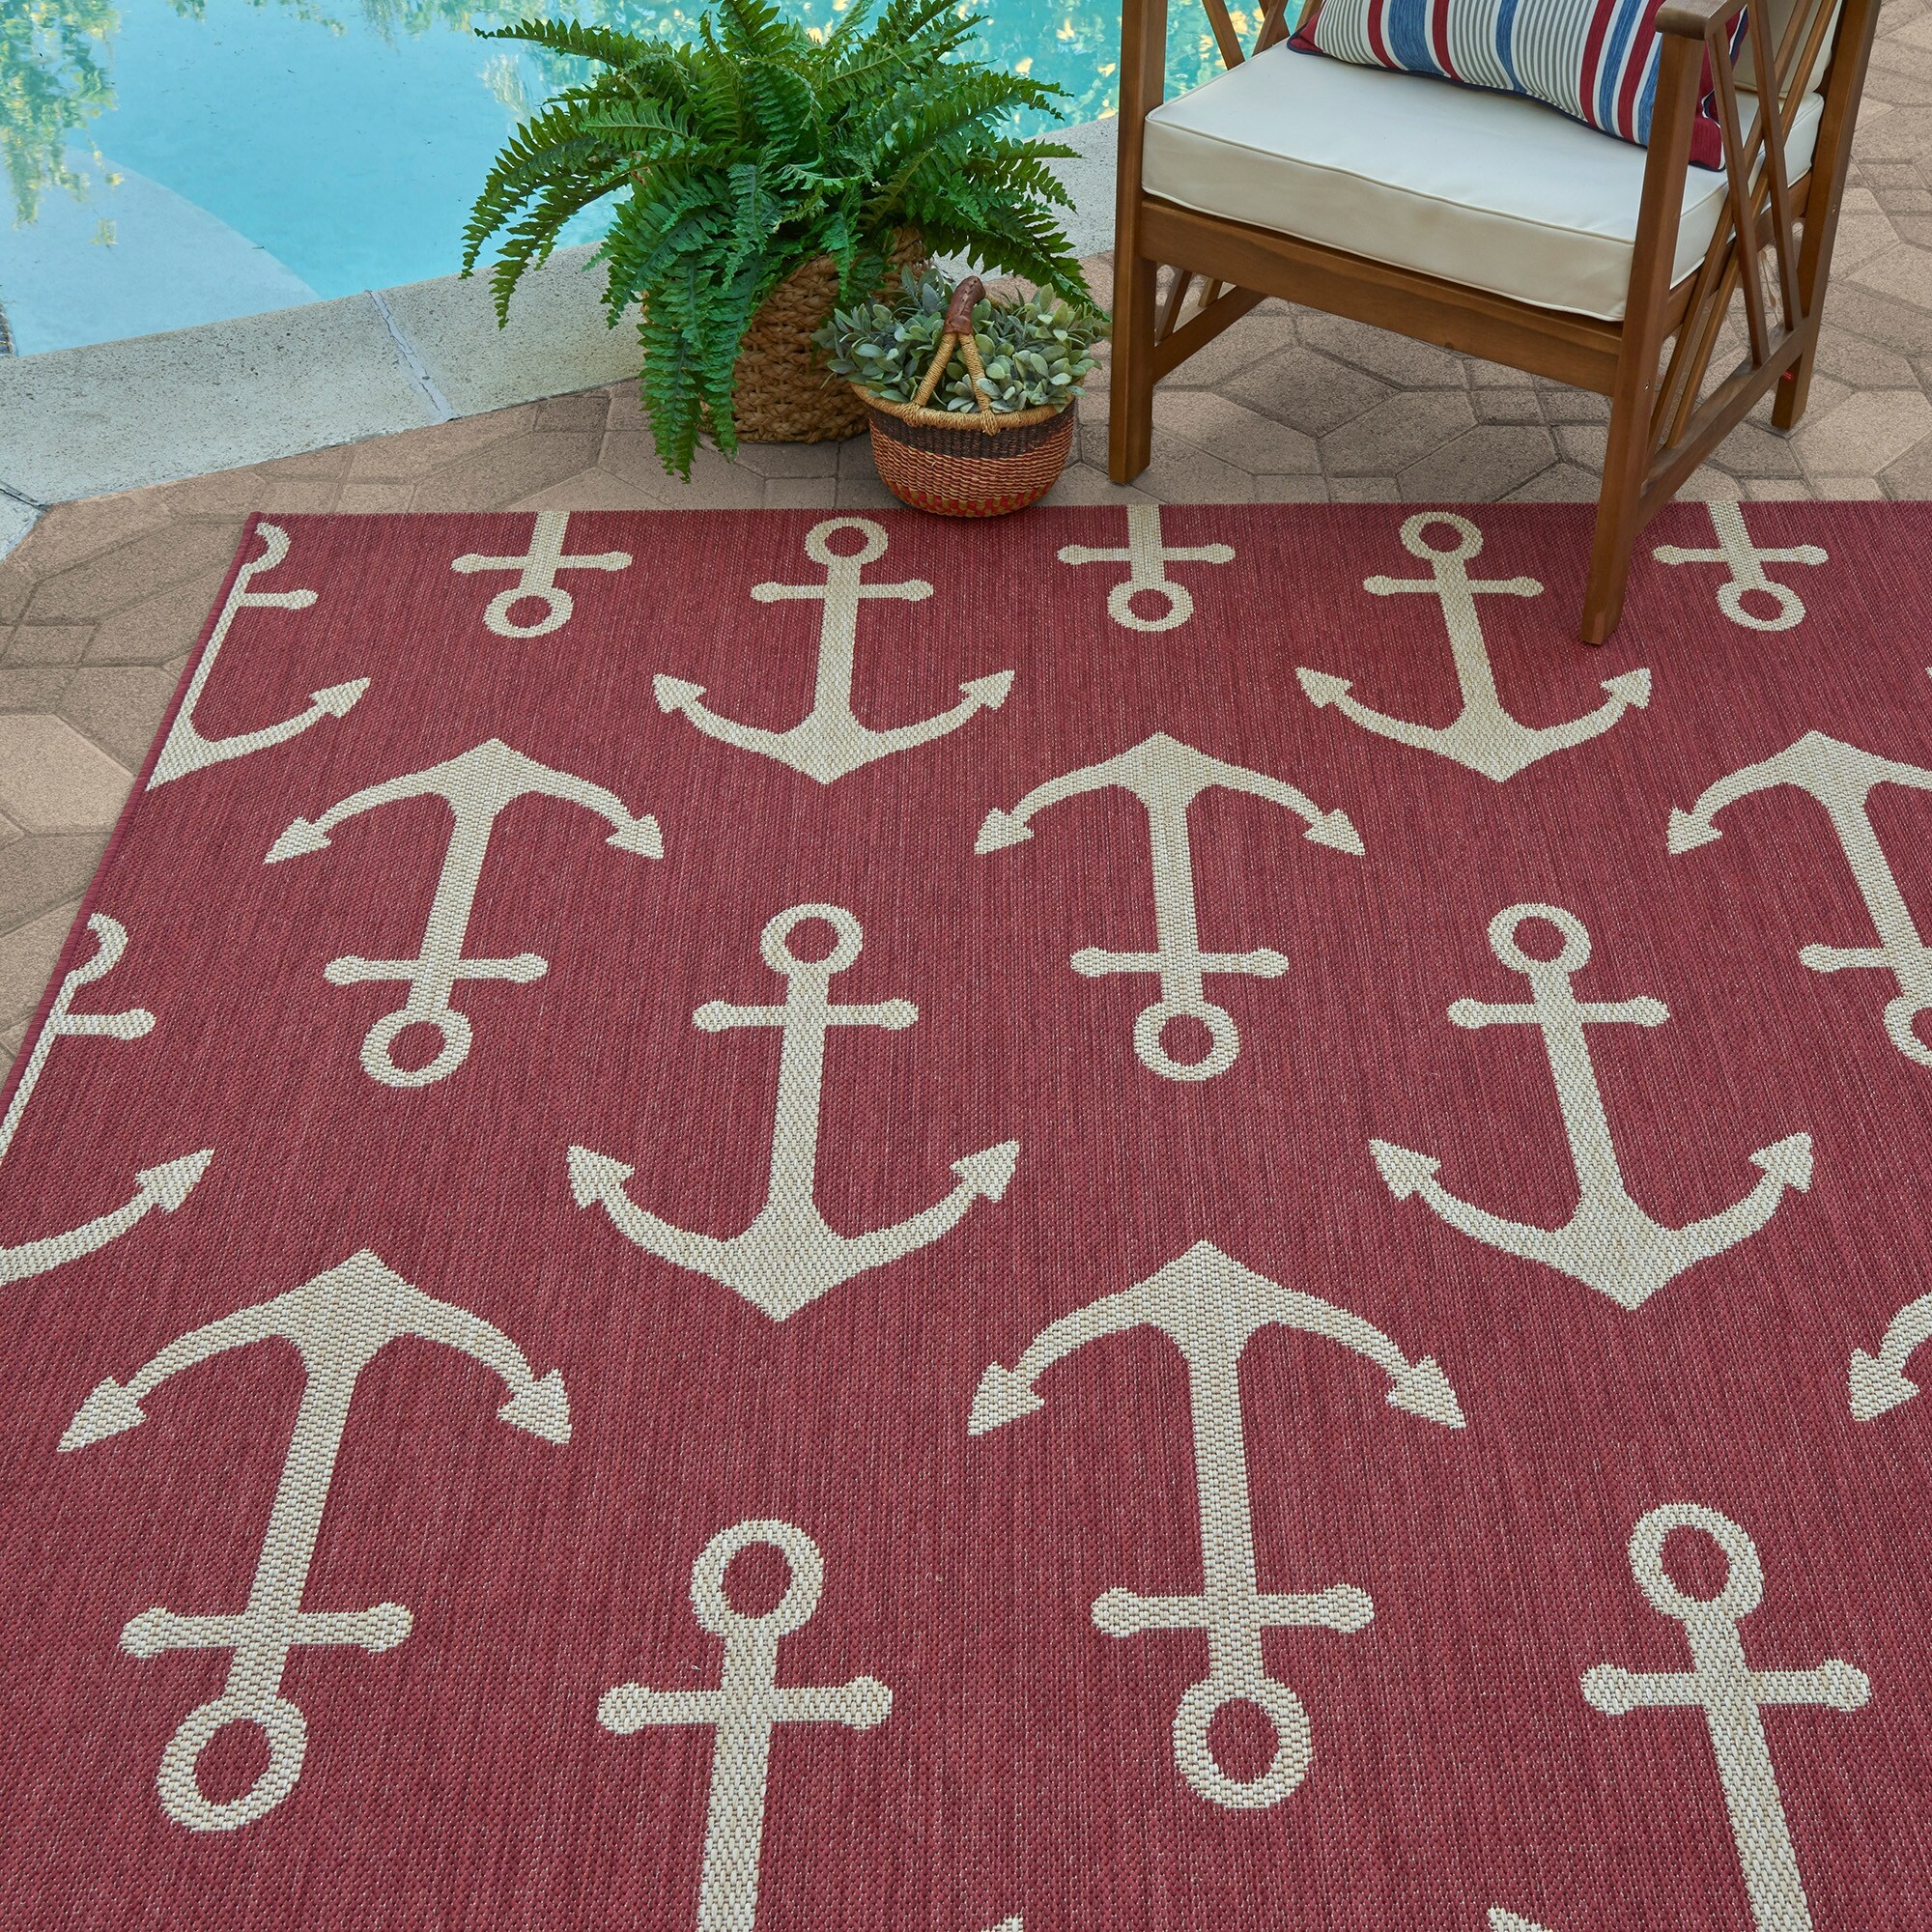 Maritime Nautical Red and White Anchor Pattern - Anchors Rug by Art by  Simplicity of life